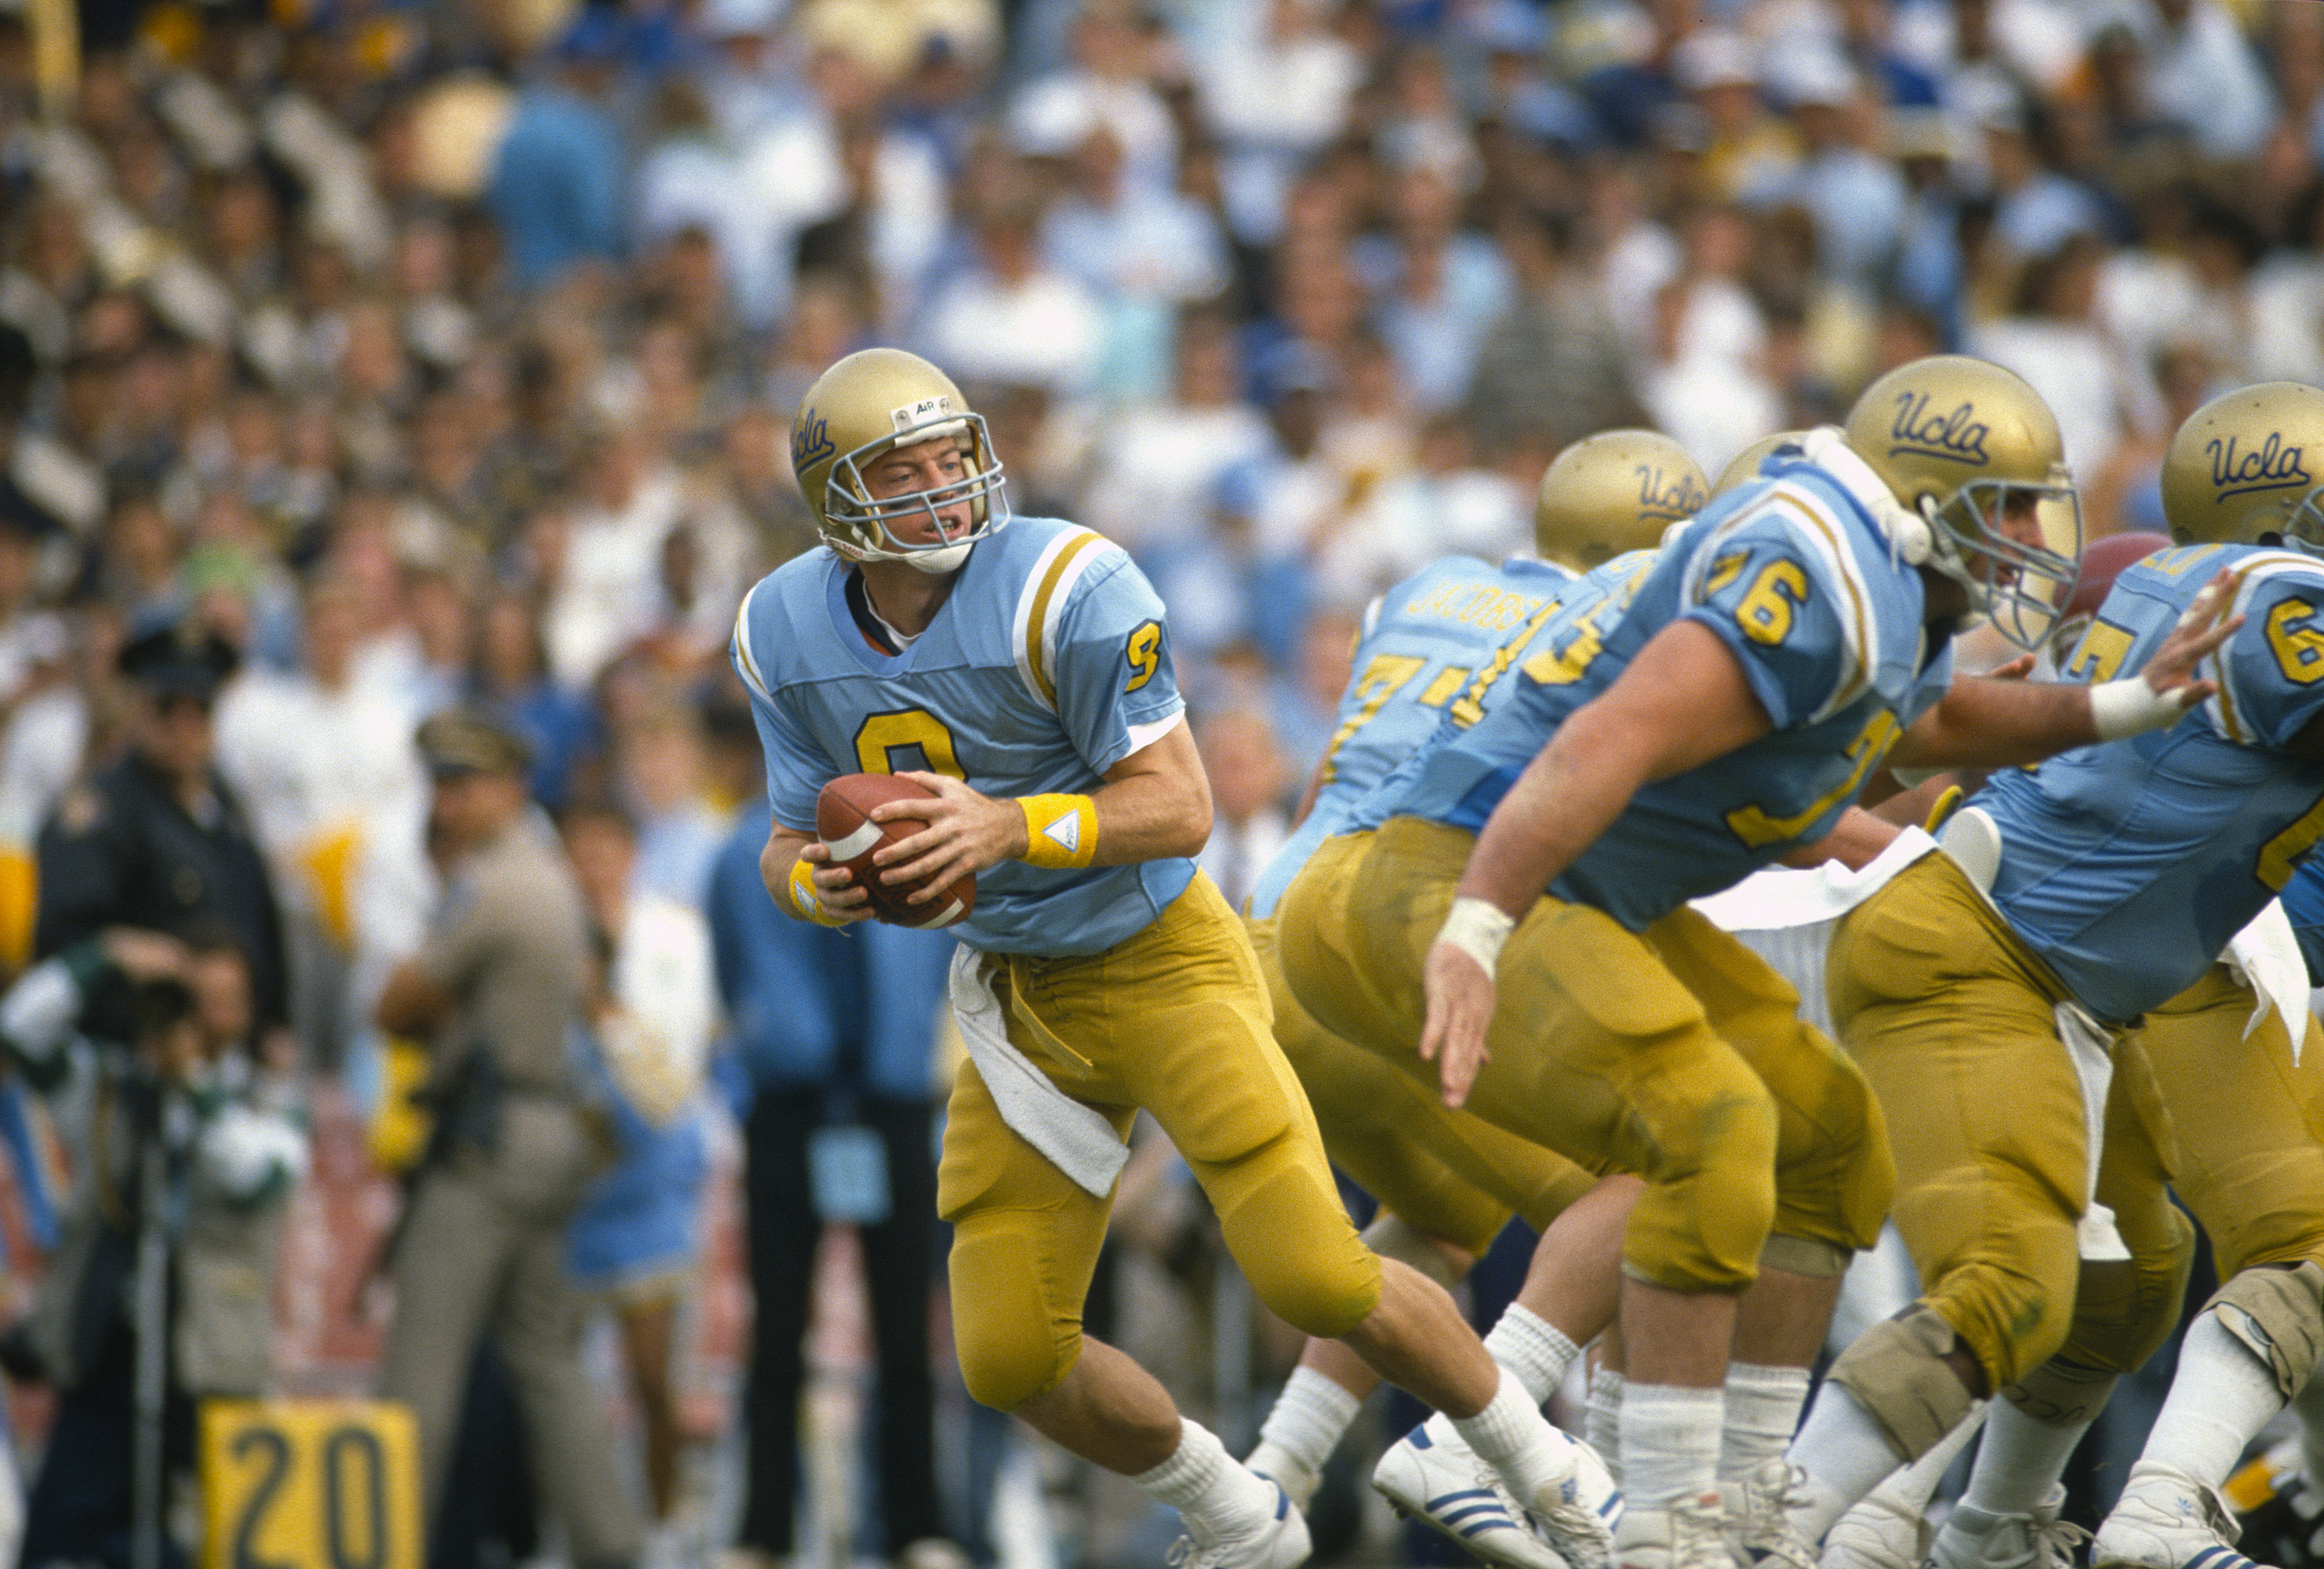 Troy Aikman Just Sent a ‘Really Hopeful’ Message to UCLA Football: ‘Stay the Course Right Now’